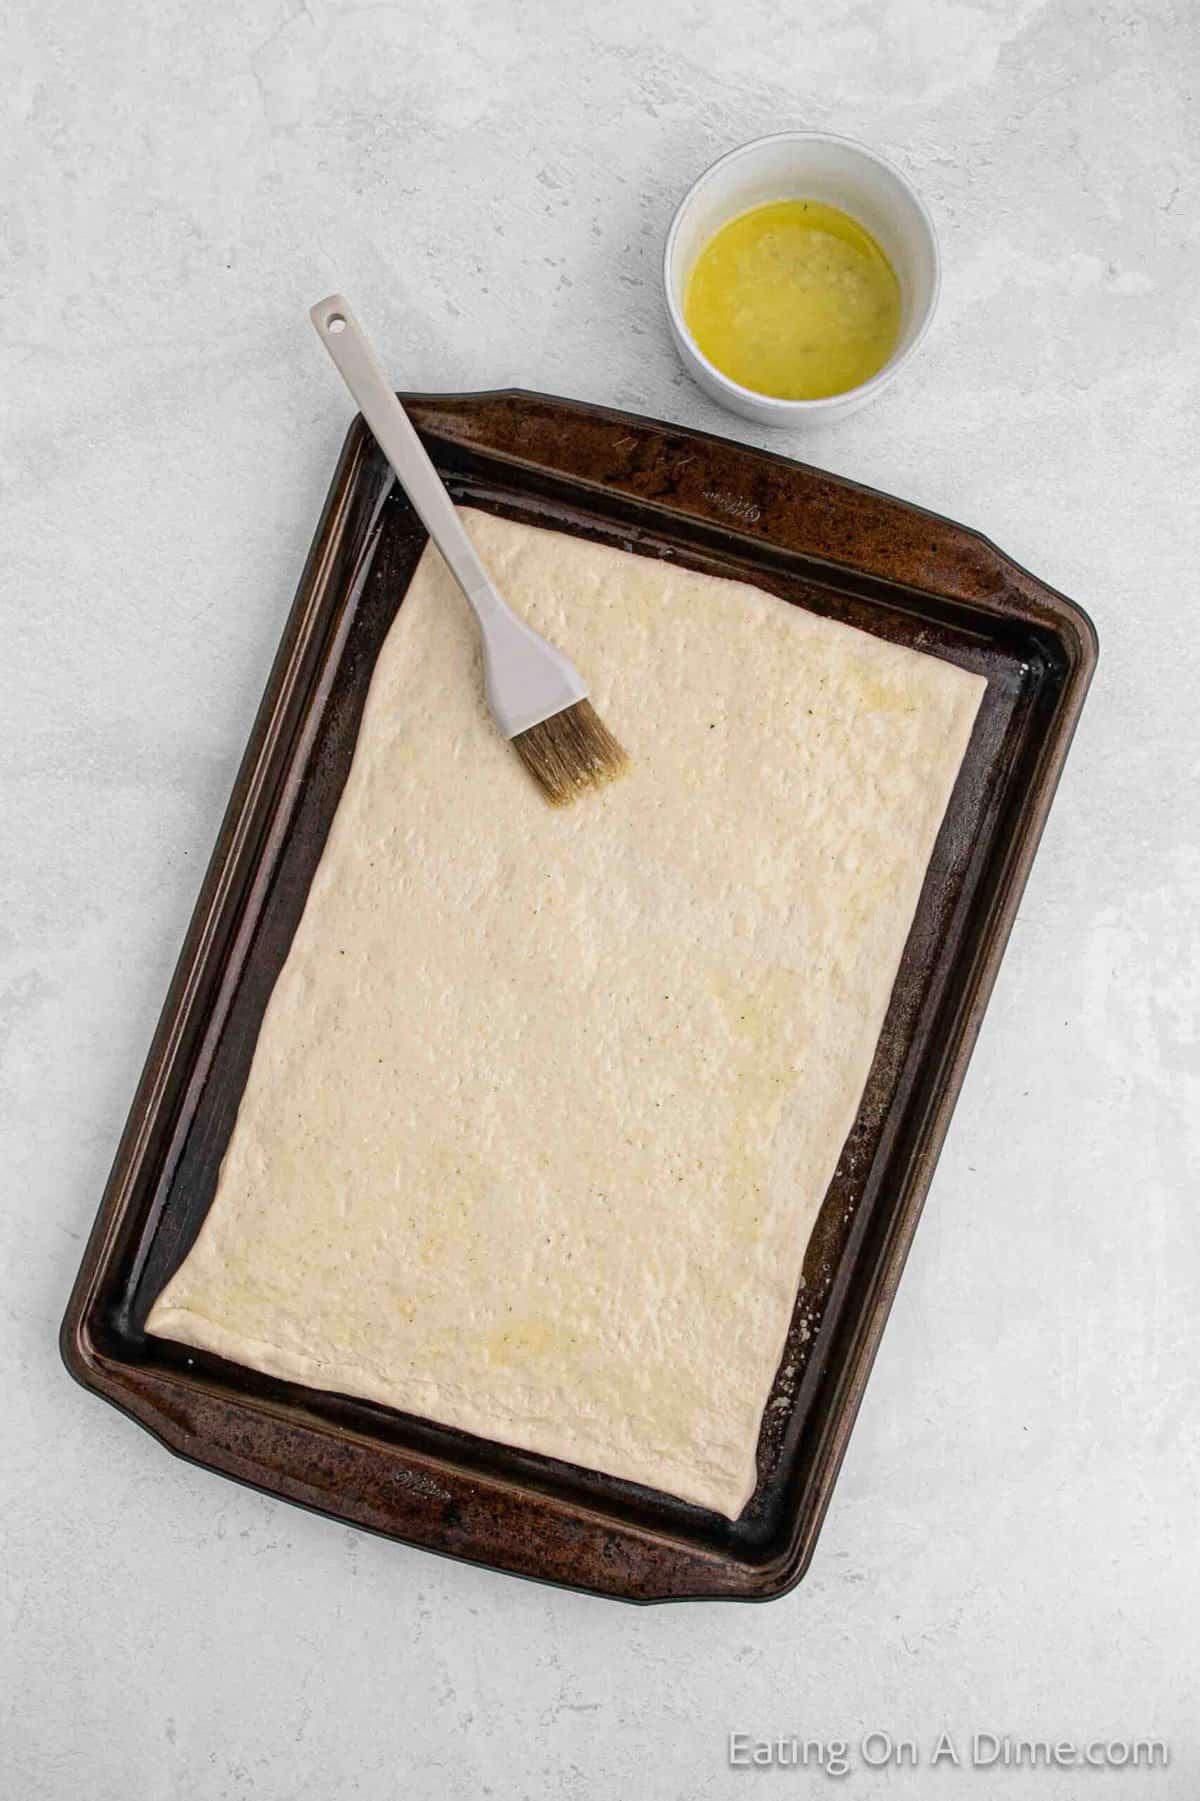 Topping the dough with melted butter